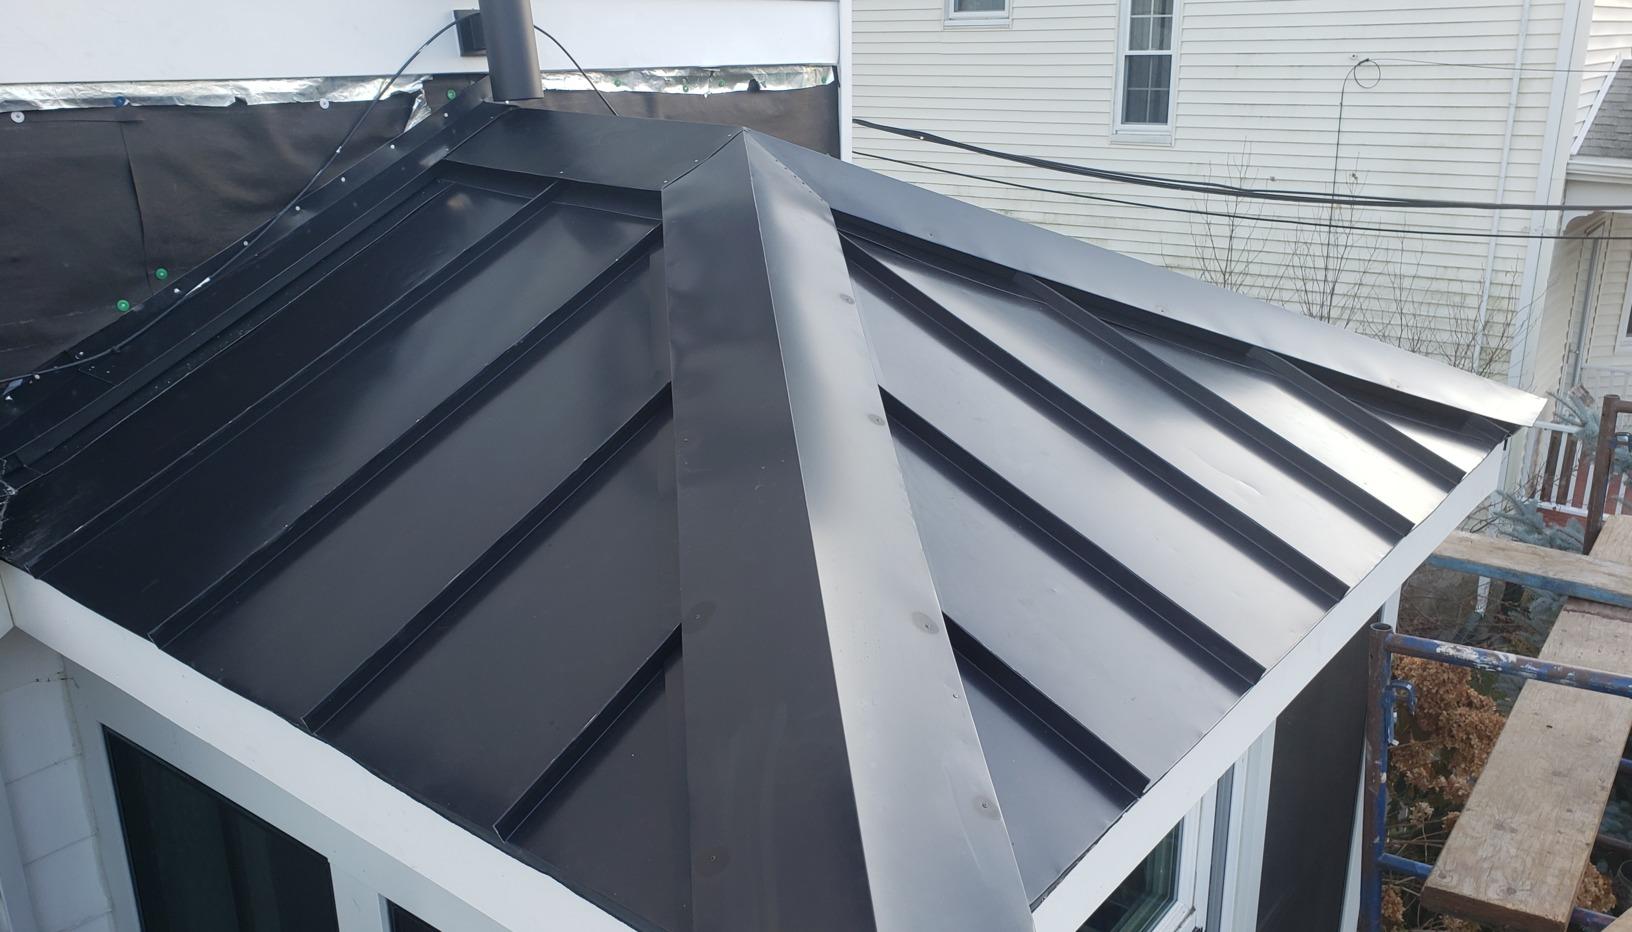 Do metal roofs require special maintenance?